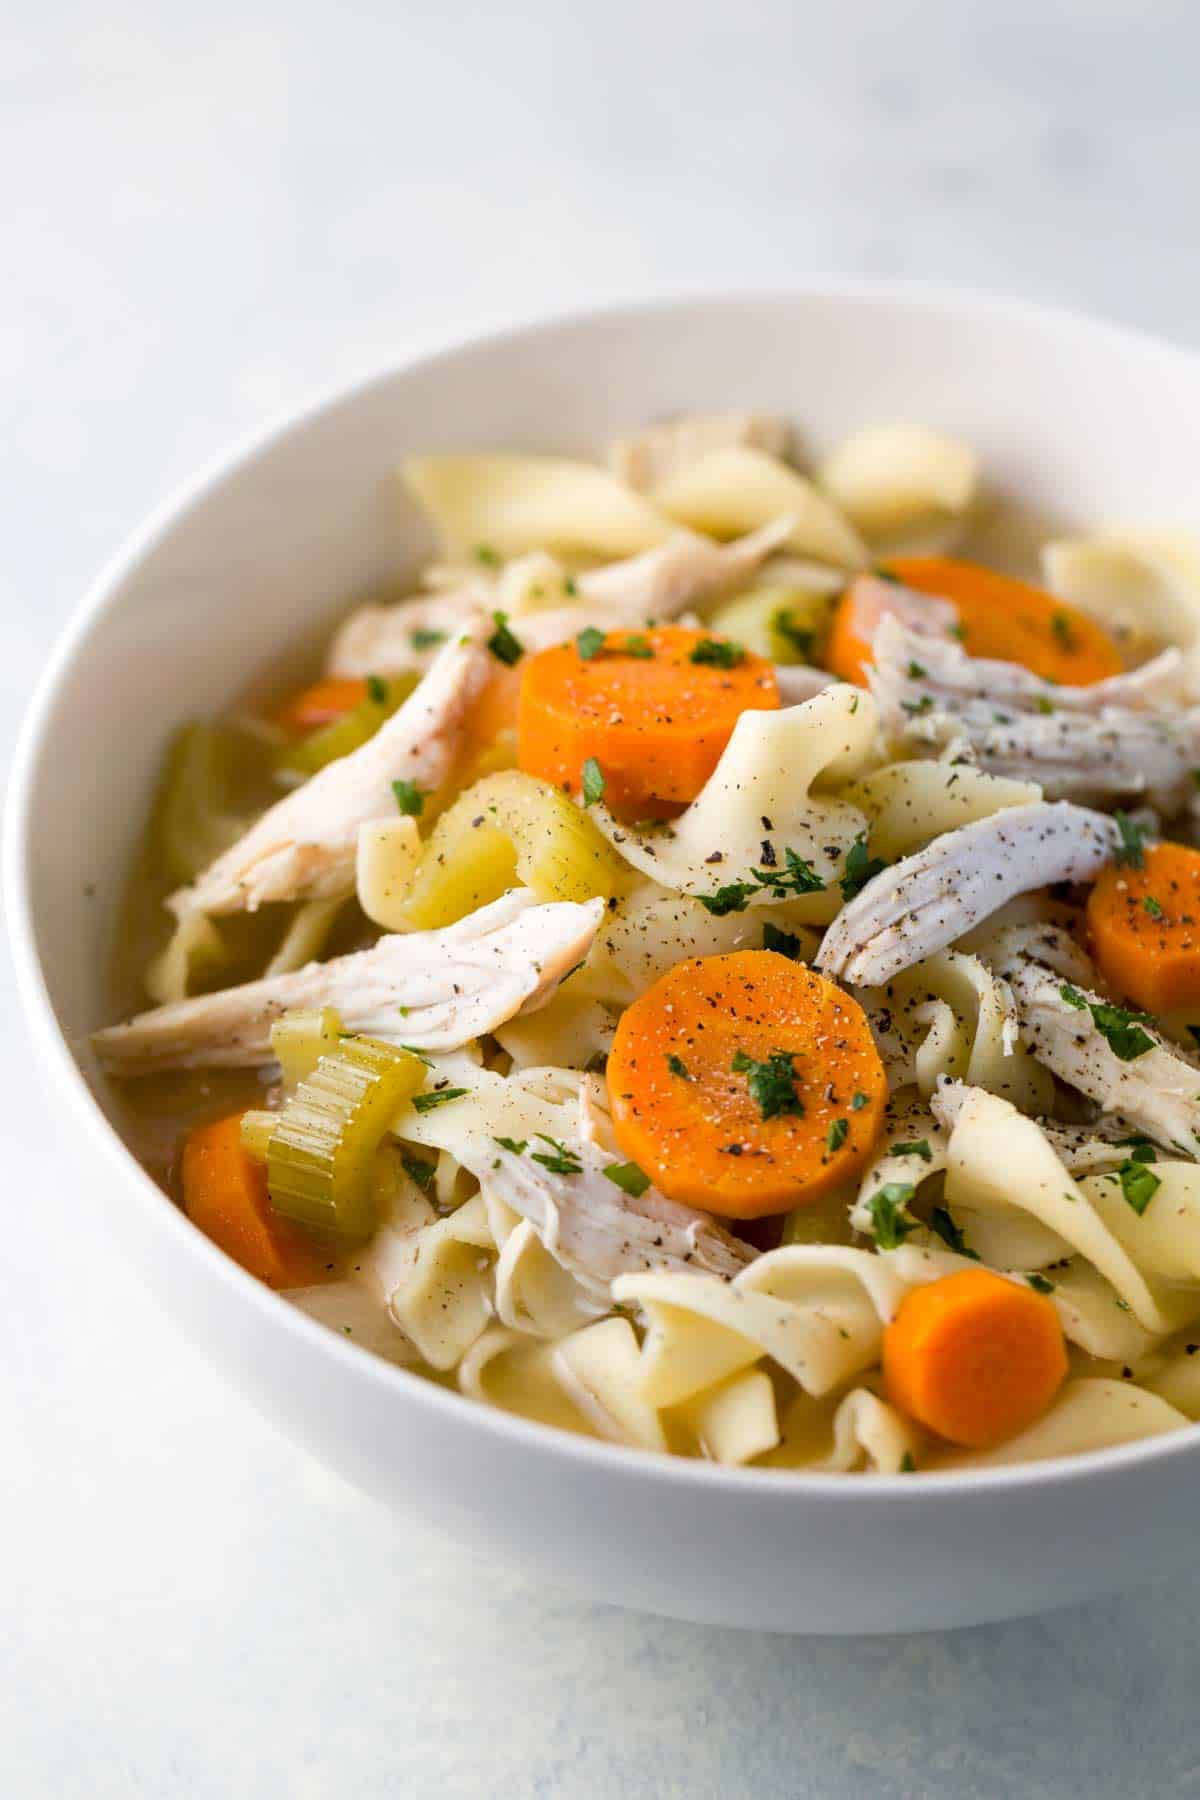 Chicken Noodle Soup With Vegetables
 Easy Slow Cooker Chicken Noodle Soup Recipe